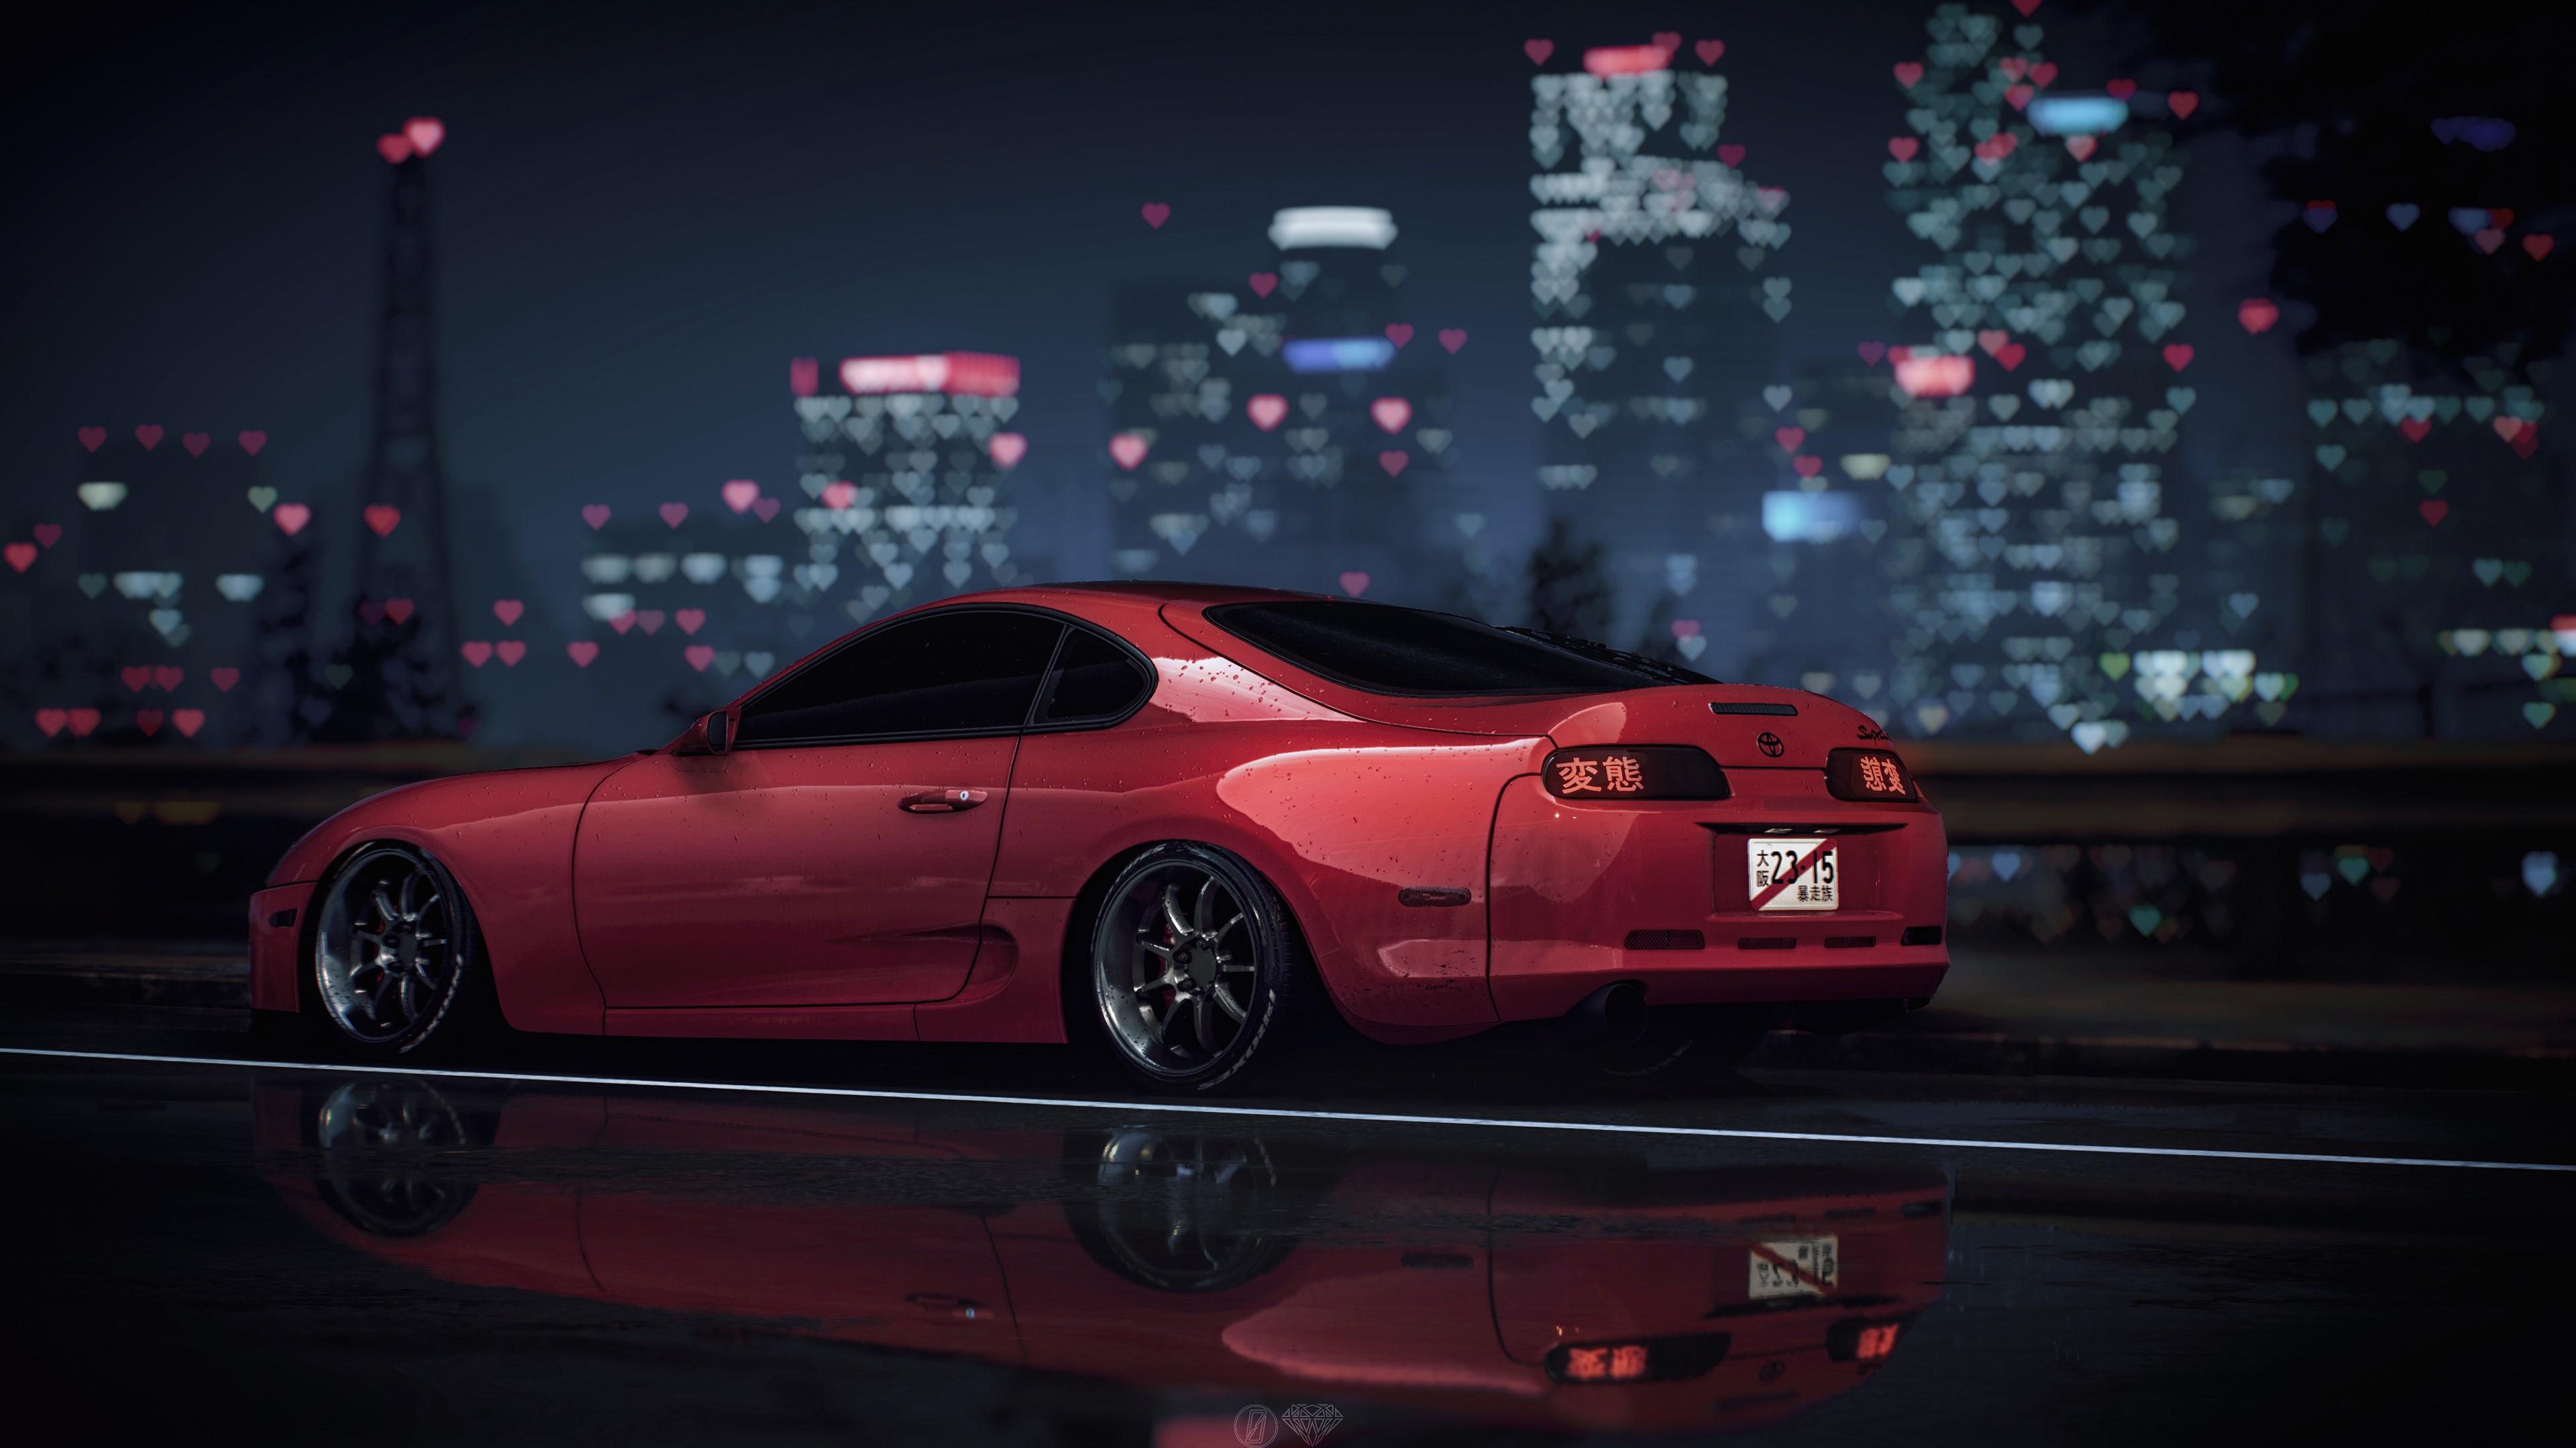 Wallpaper ID 74945 toyota supra need for speed games hd 4k